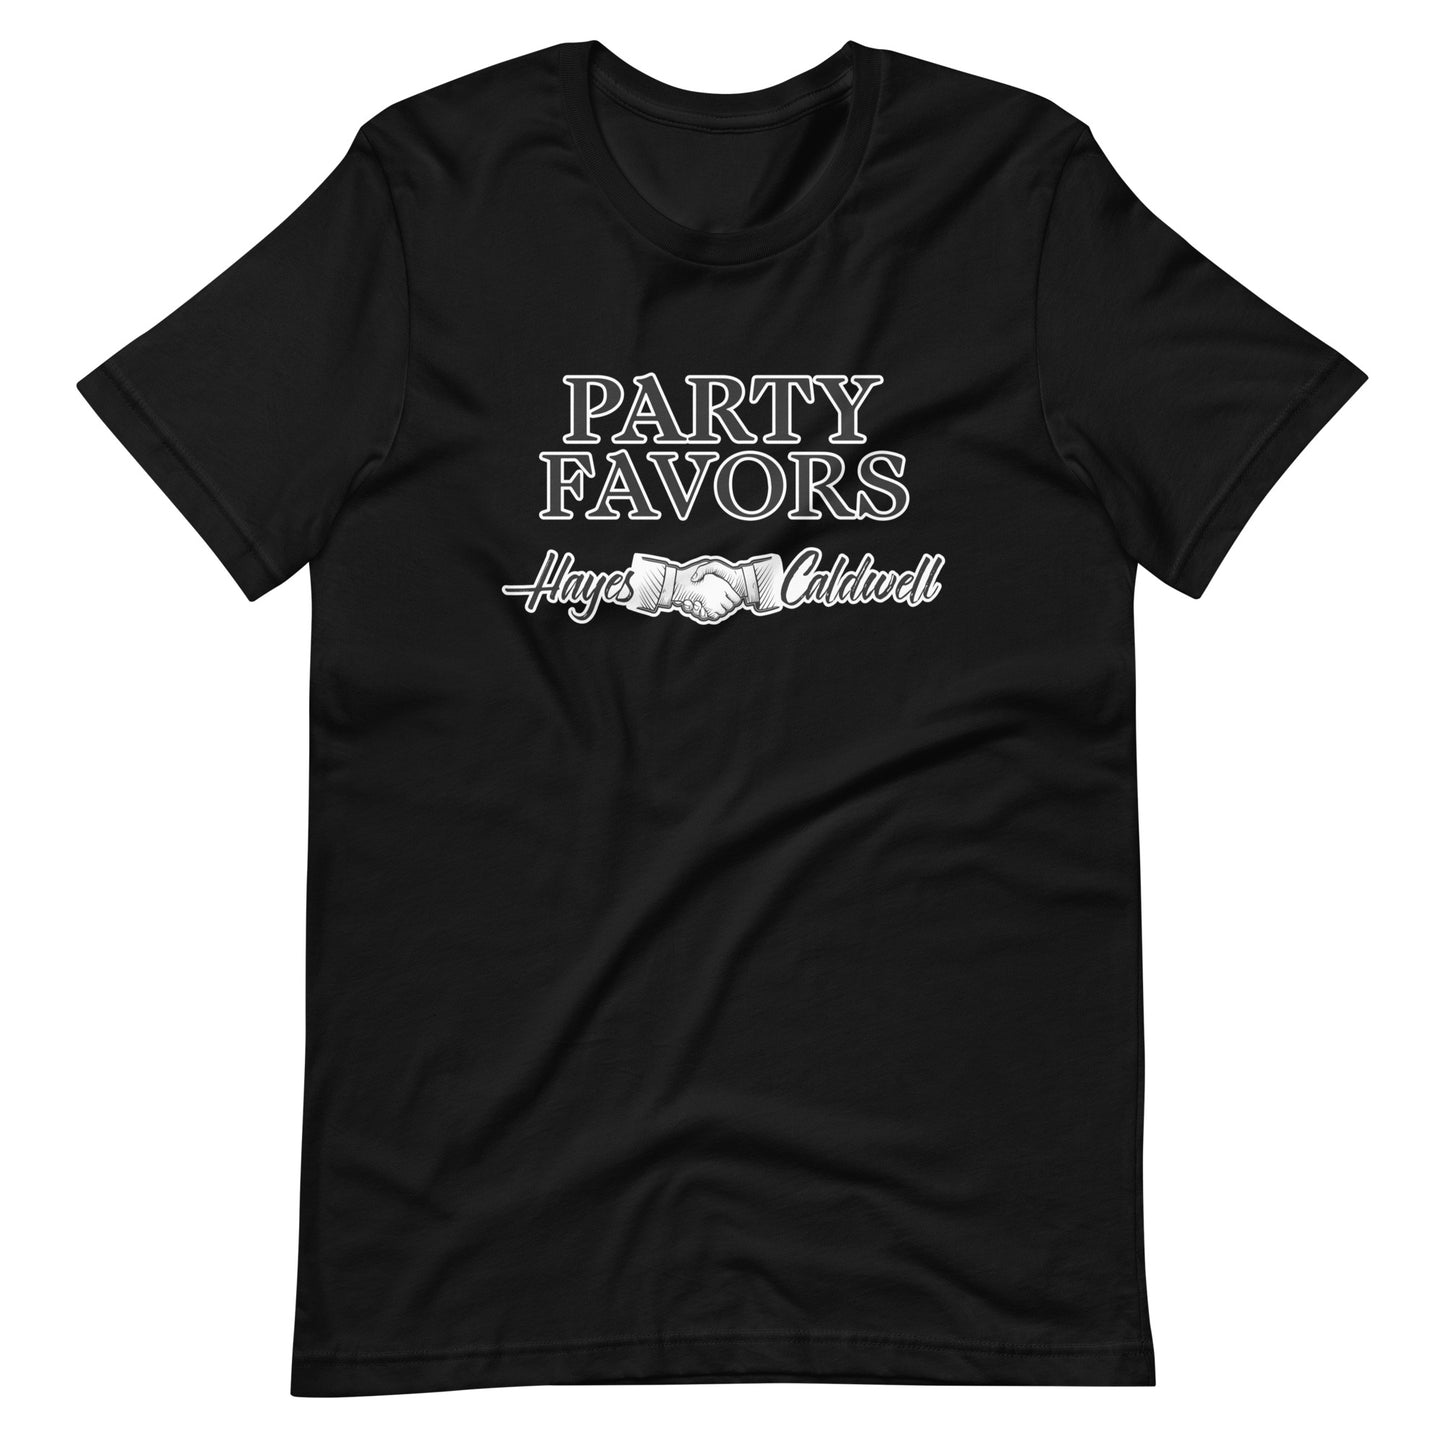 Hayes X Caldwell Party Favors Shirt